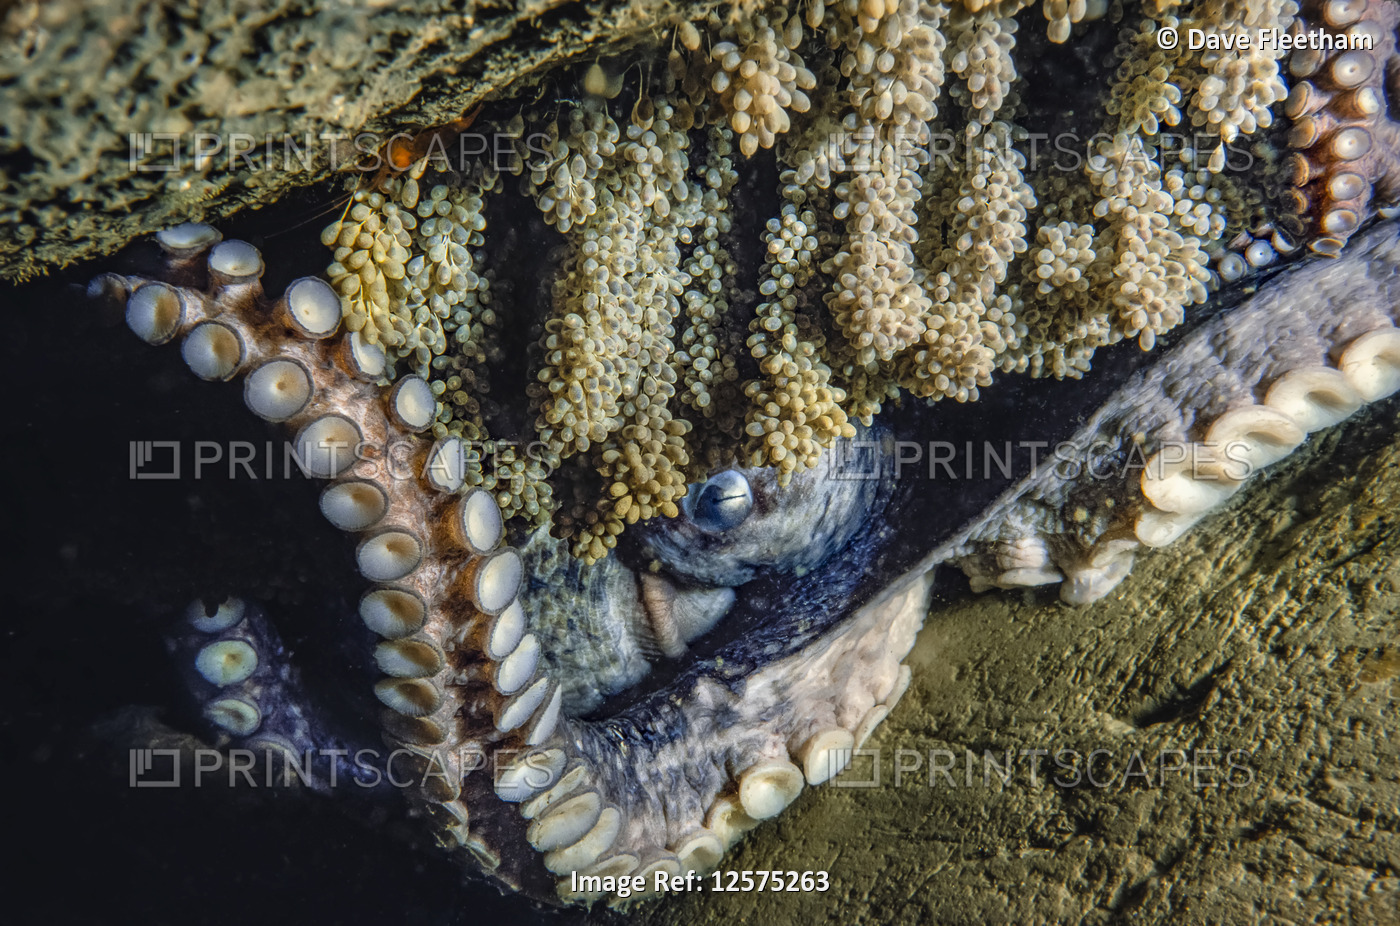 This female Giant Pacific octopus (Enteroctopus dolfleini), or North Pacific ...